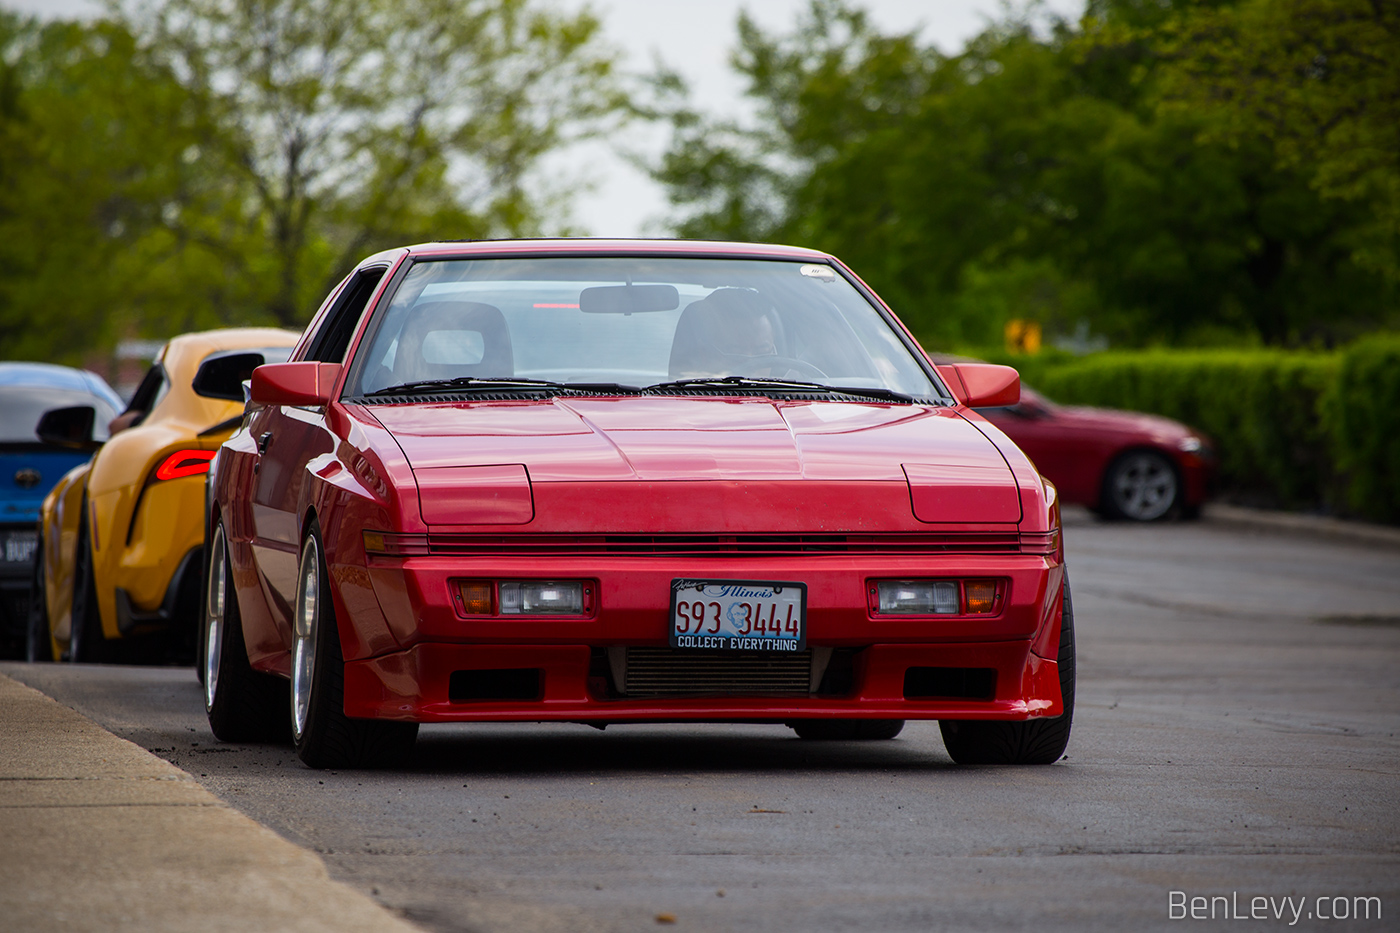 Red 1988 Chrysler Conquest TSI at Car Meet in Glenview